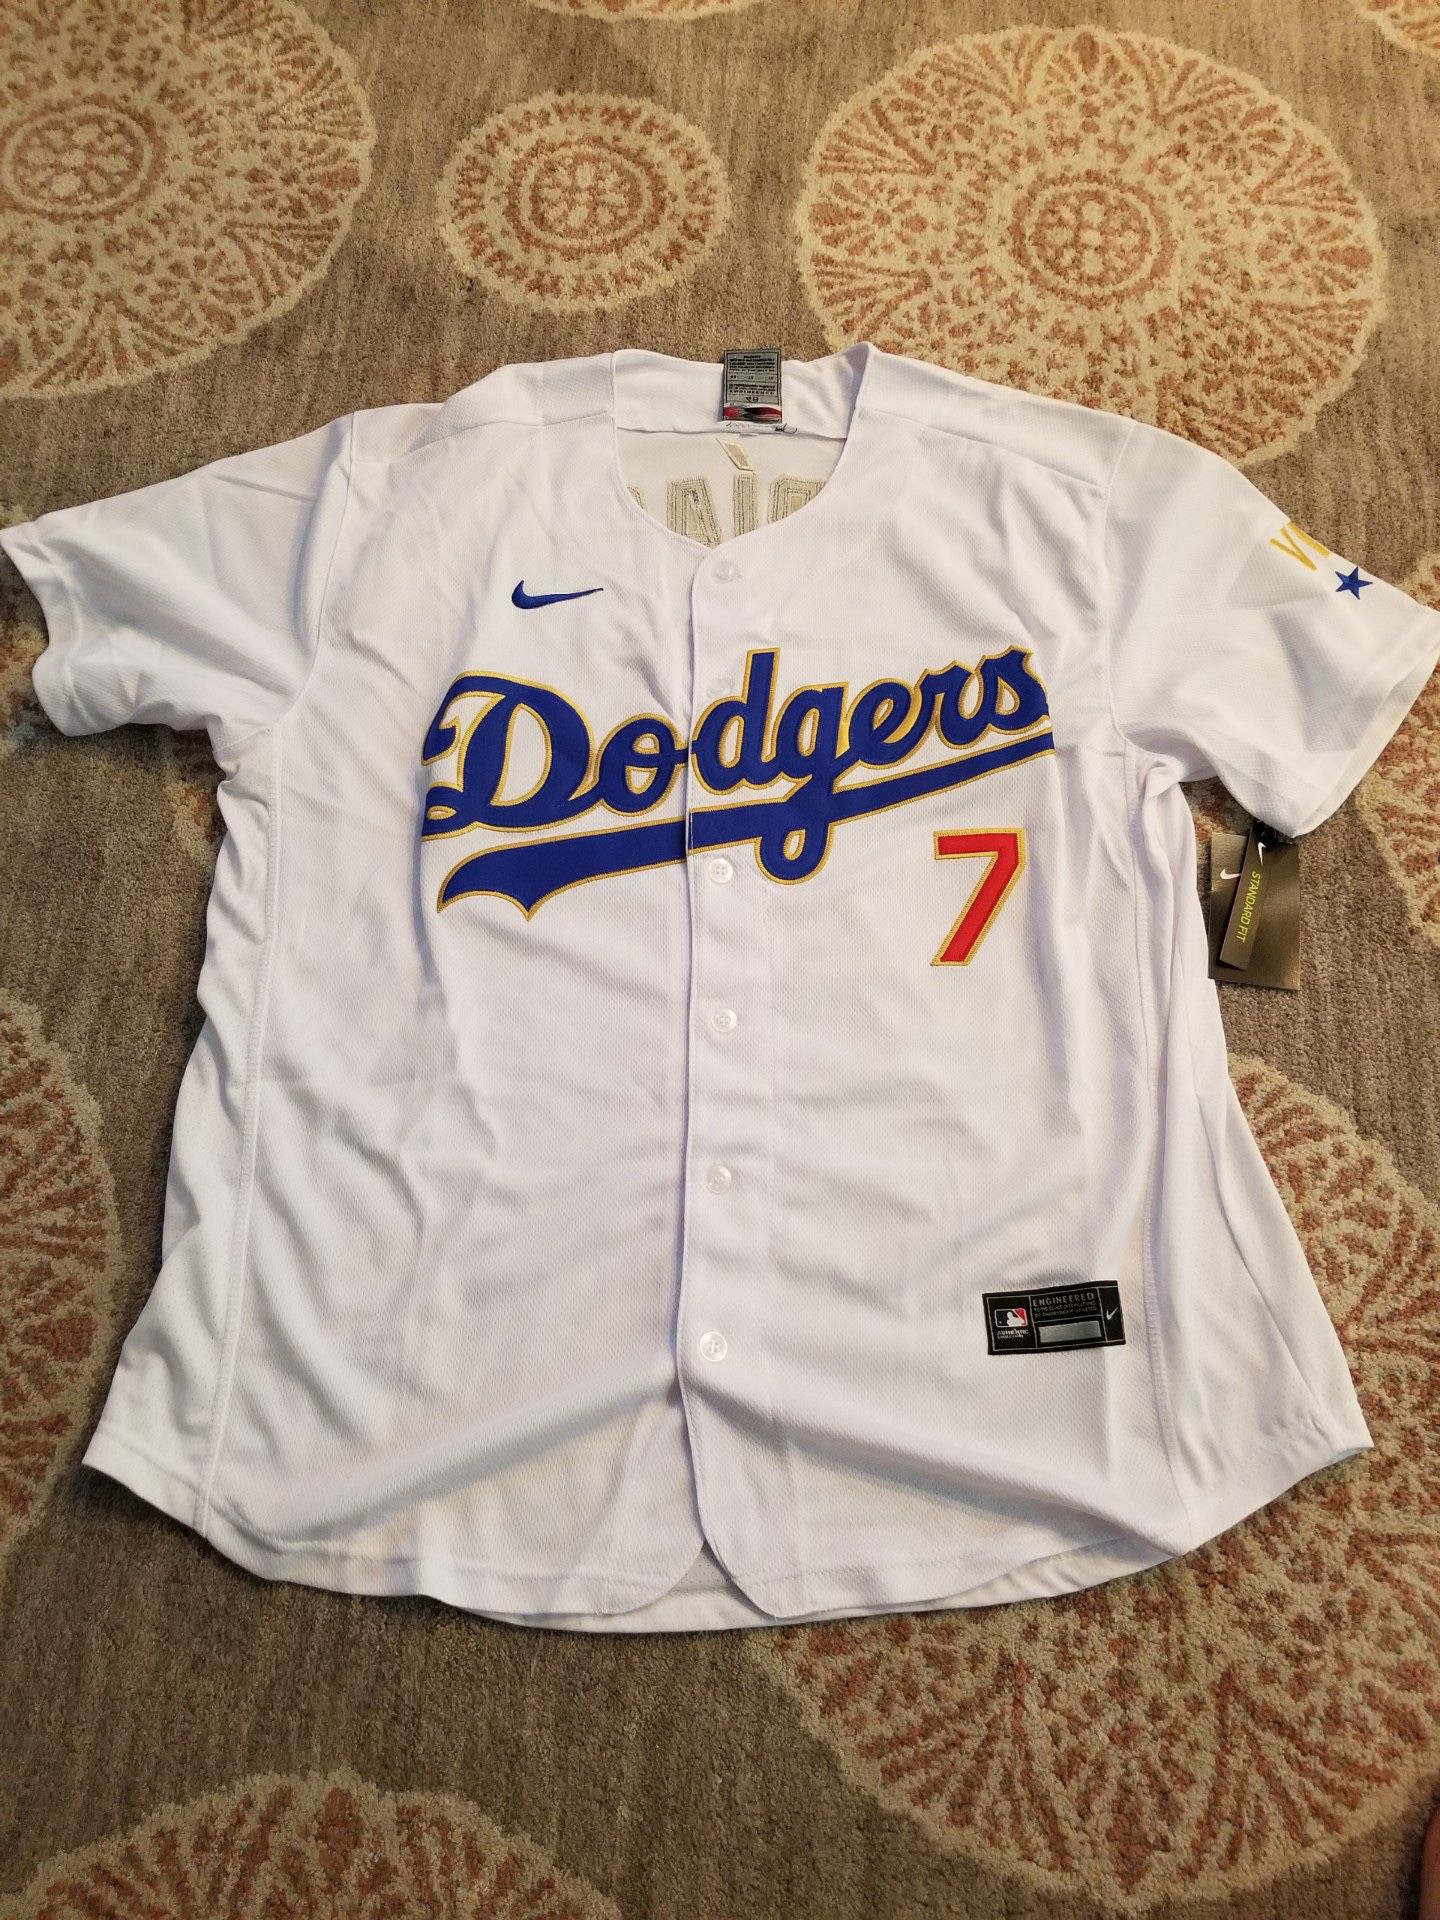 Julio Urias Jersey for Sale in Palmdale, CA - OfferUp